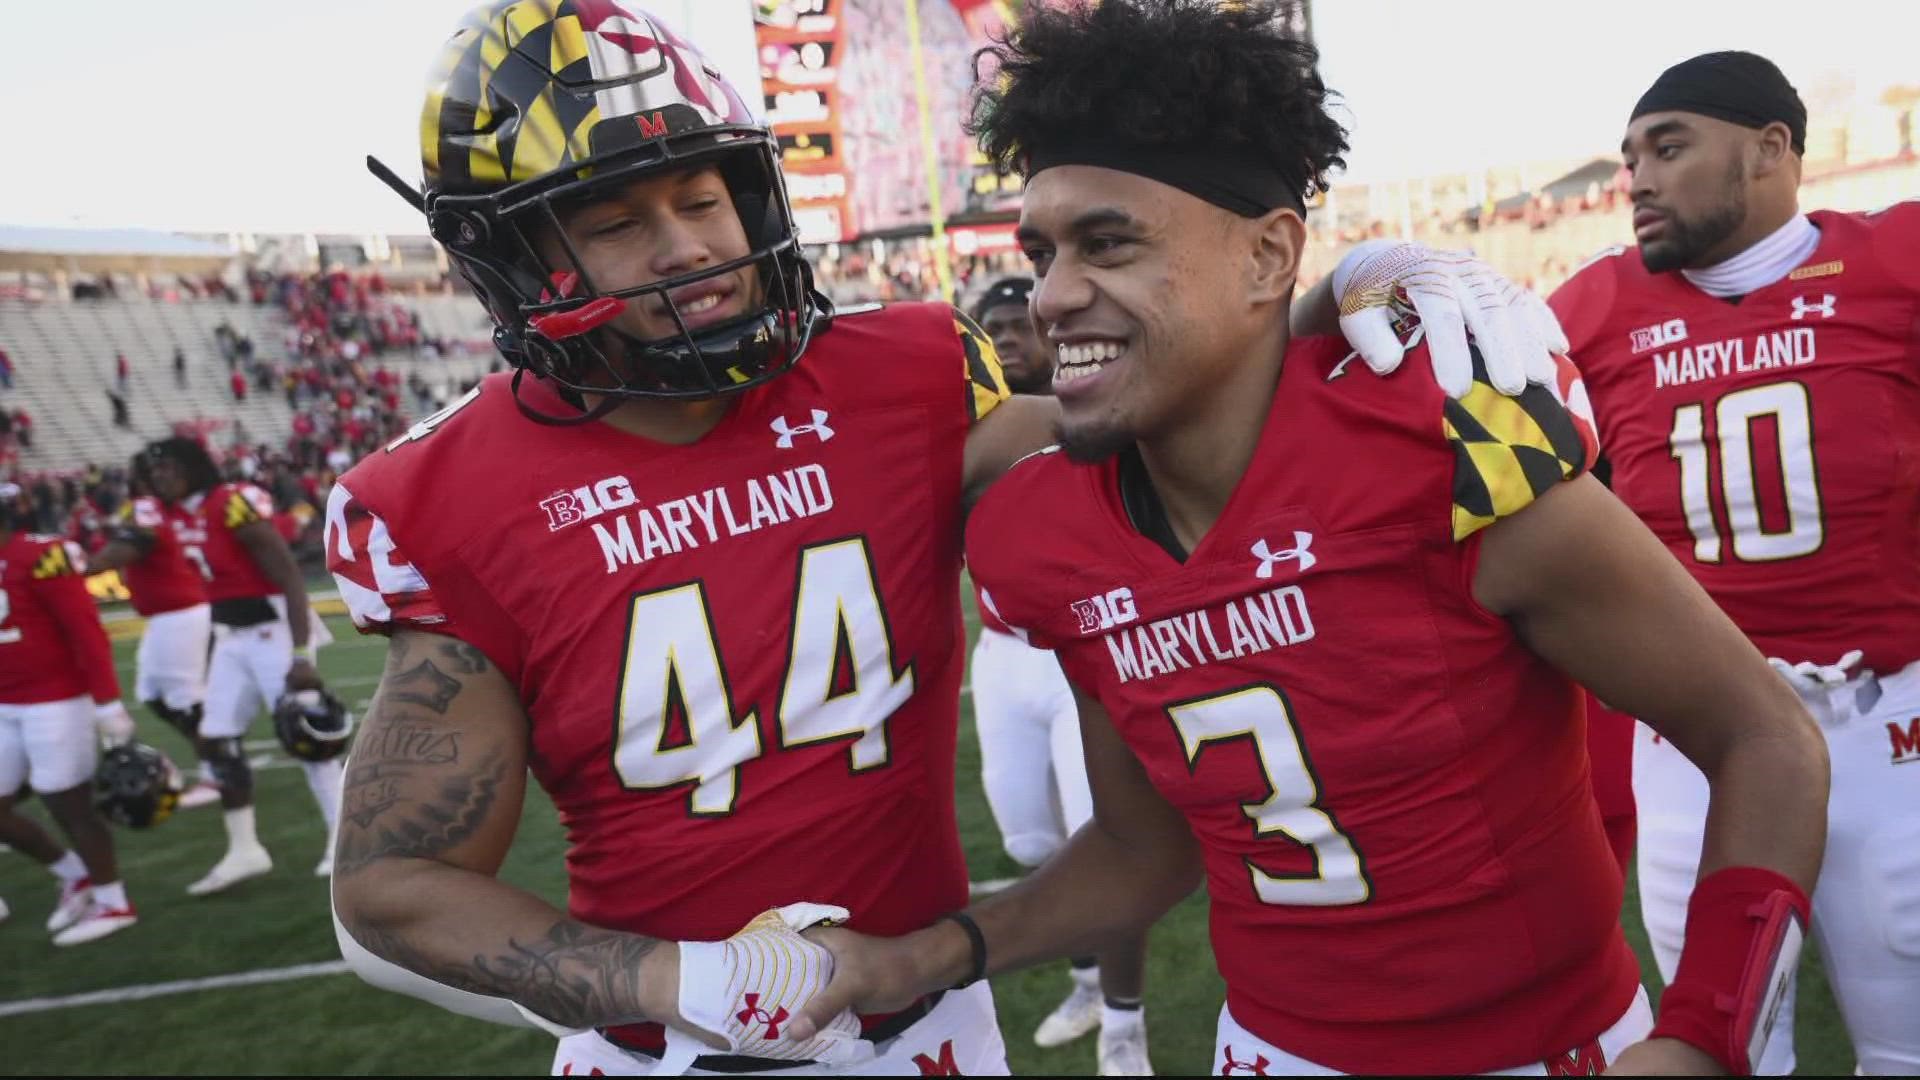 Maryland quarterback Taulia Tagovailoa is heading back to College Park for his senior season at Maryland, the team announced Wednesday.